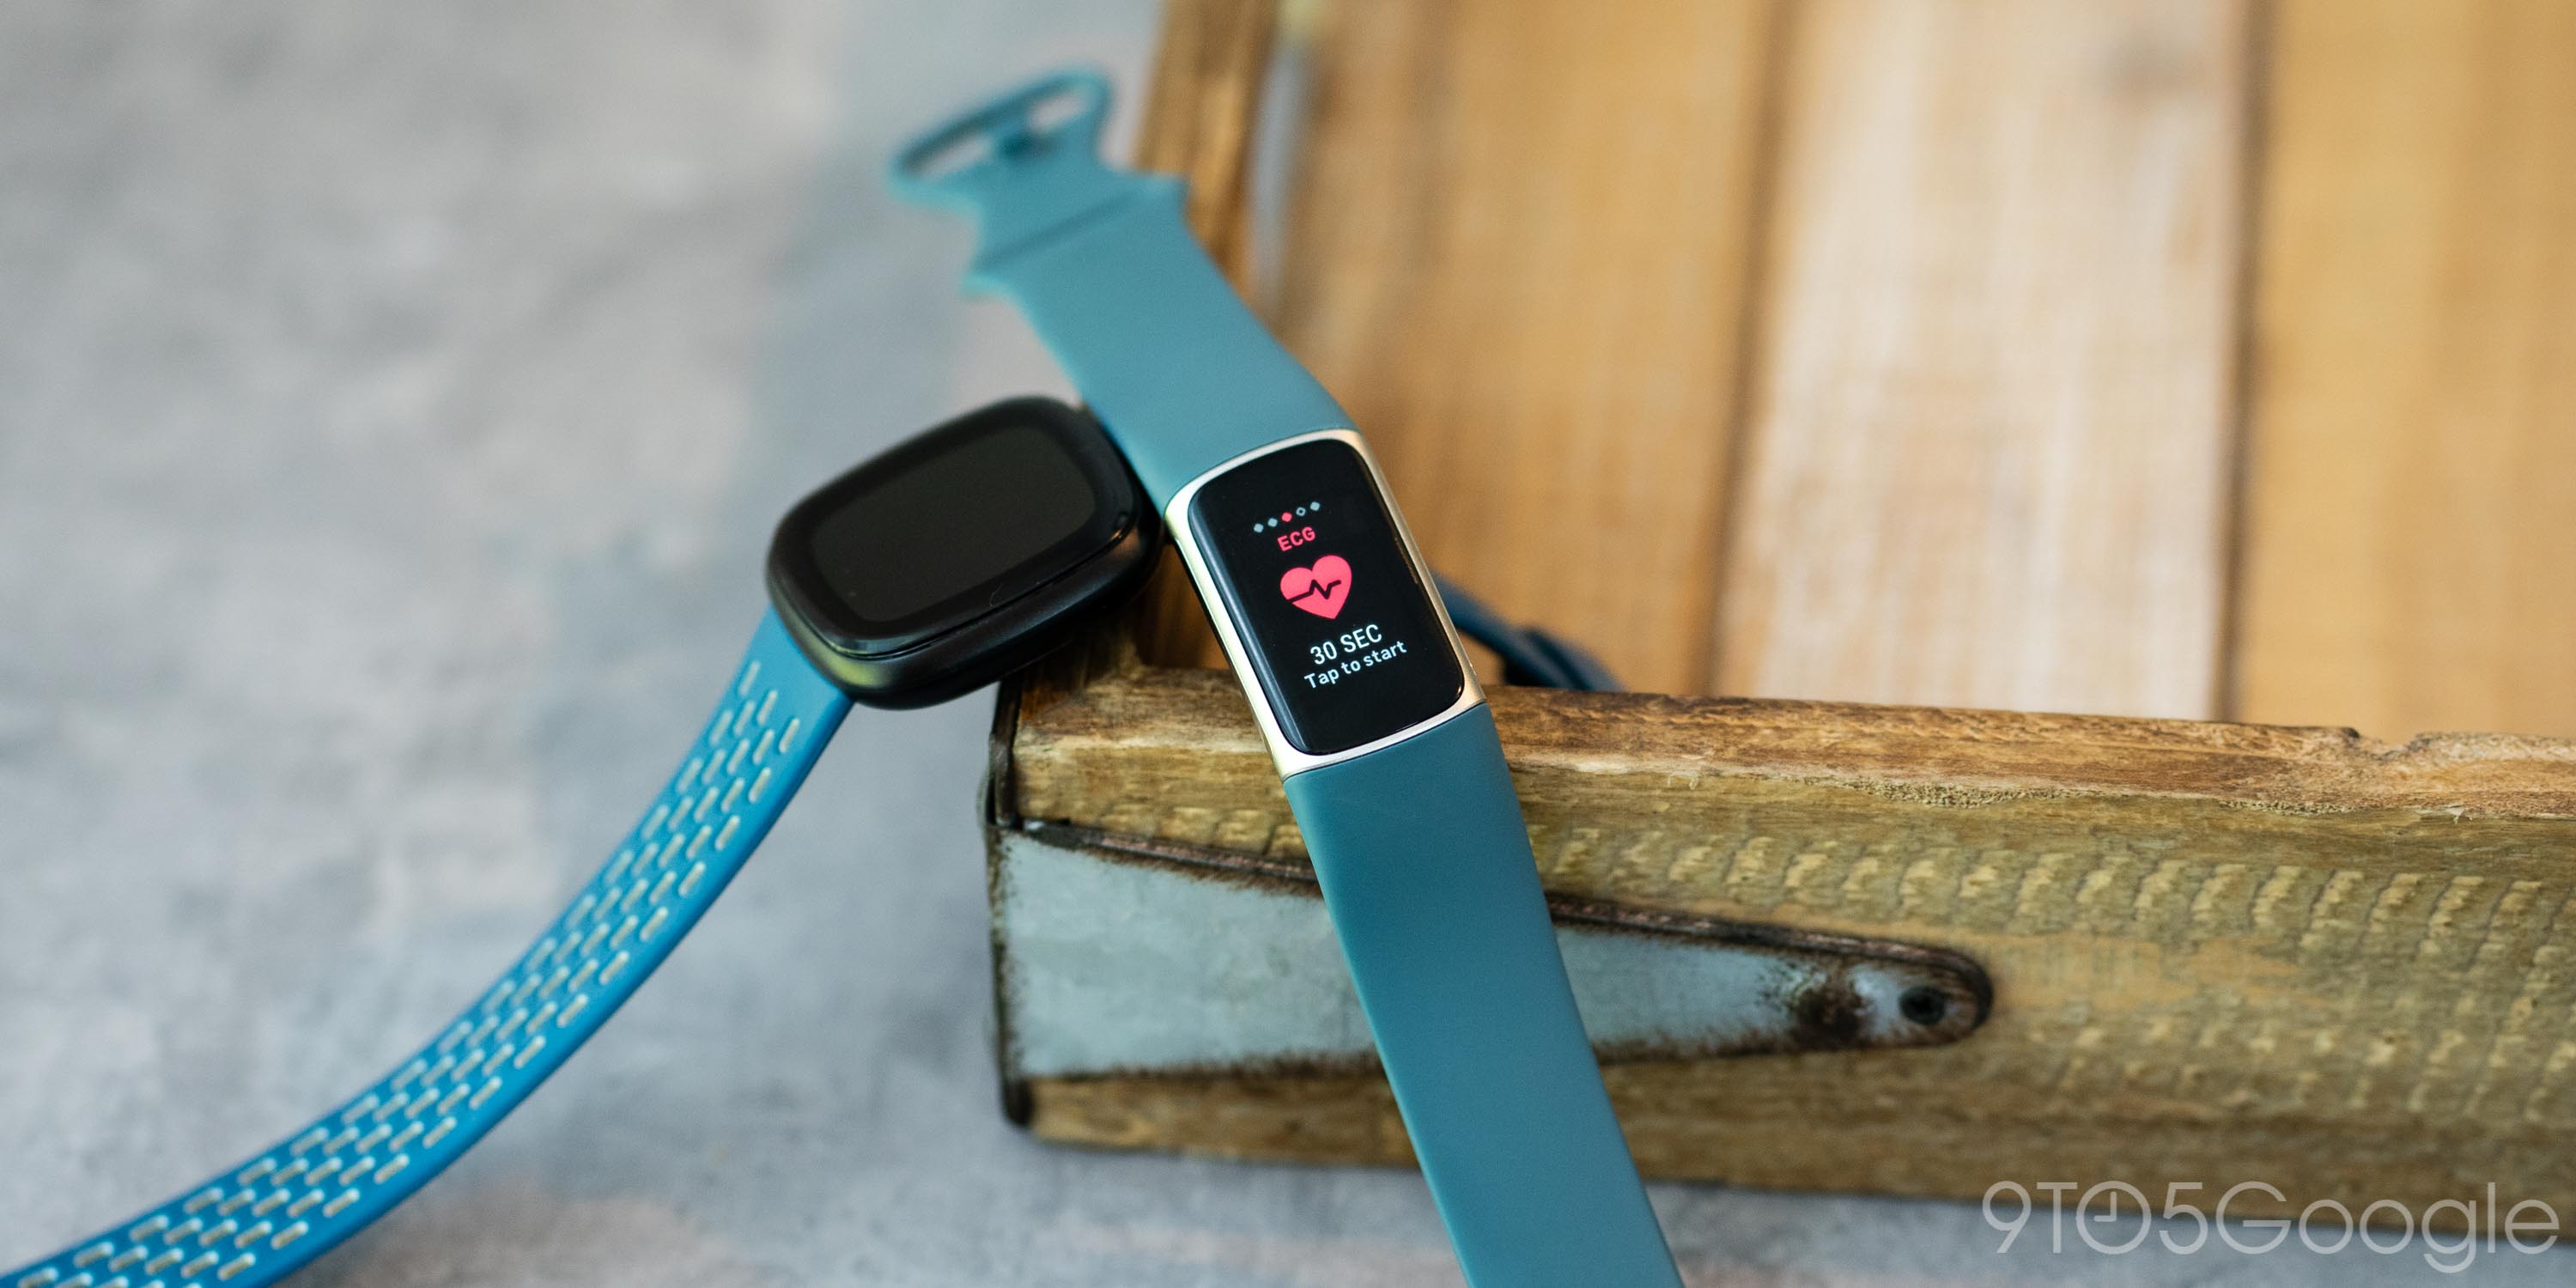 Fitbit Charge 4 goes official w/ GPS, Spotify, $149 price - 9to5Google